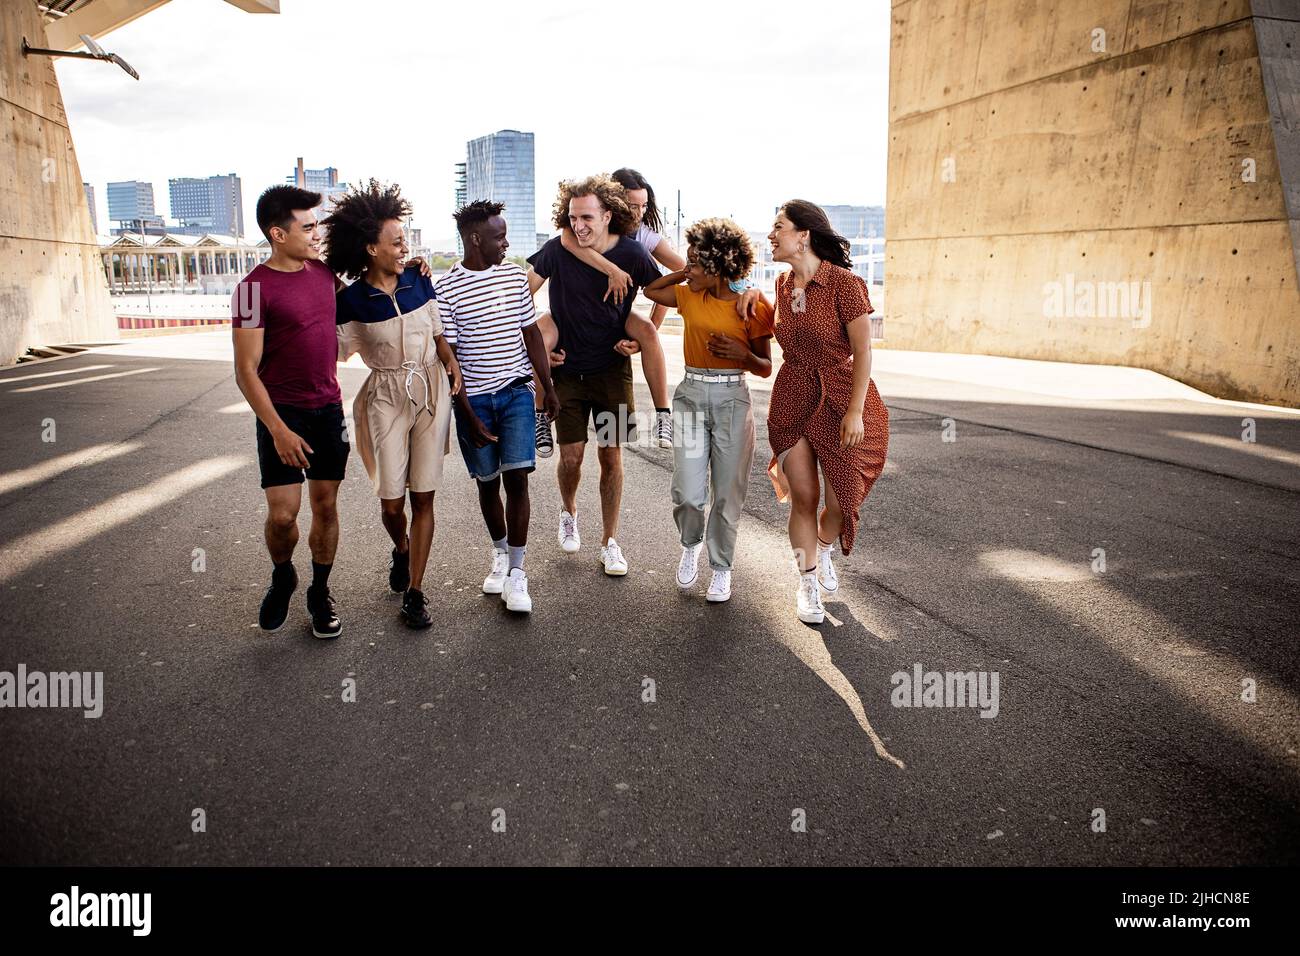 United group of multiracial young friends walking together on city street Stock Photo